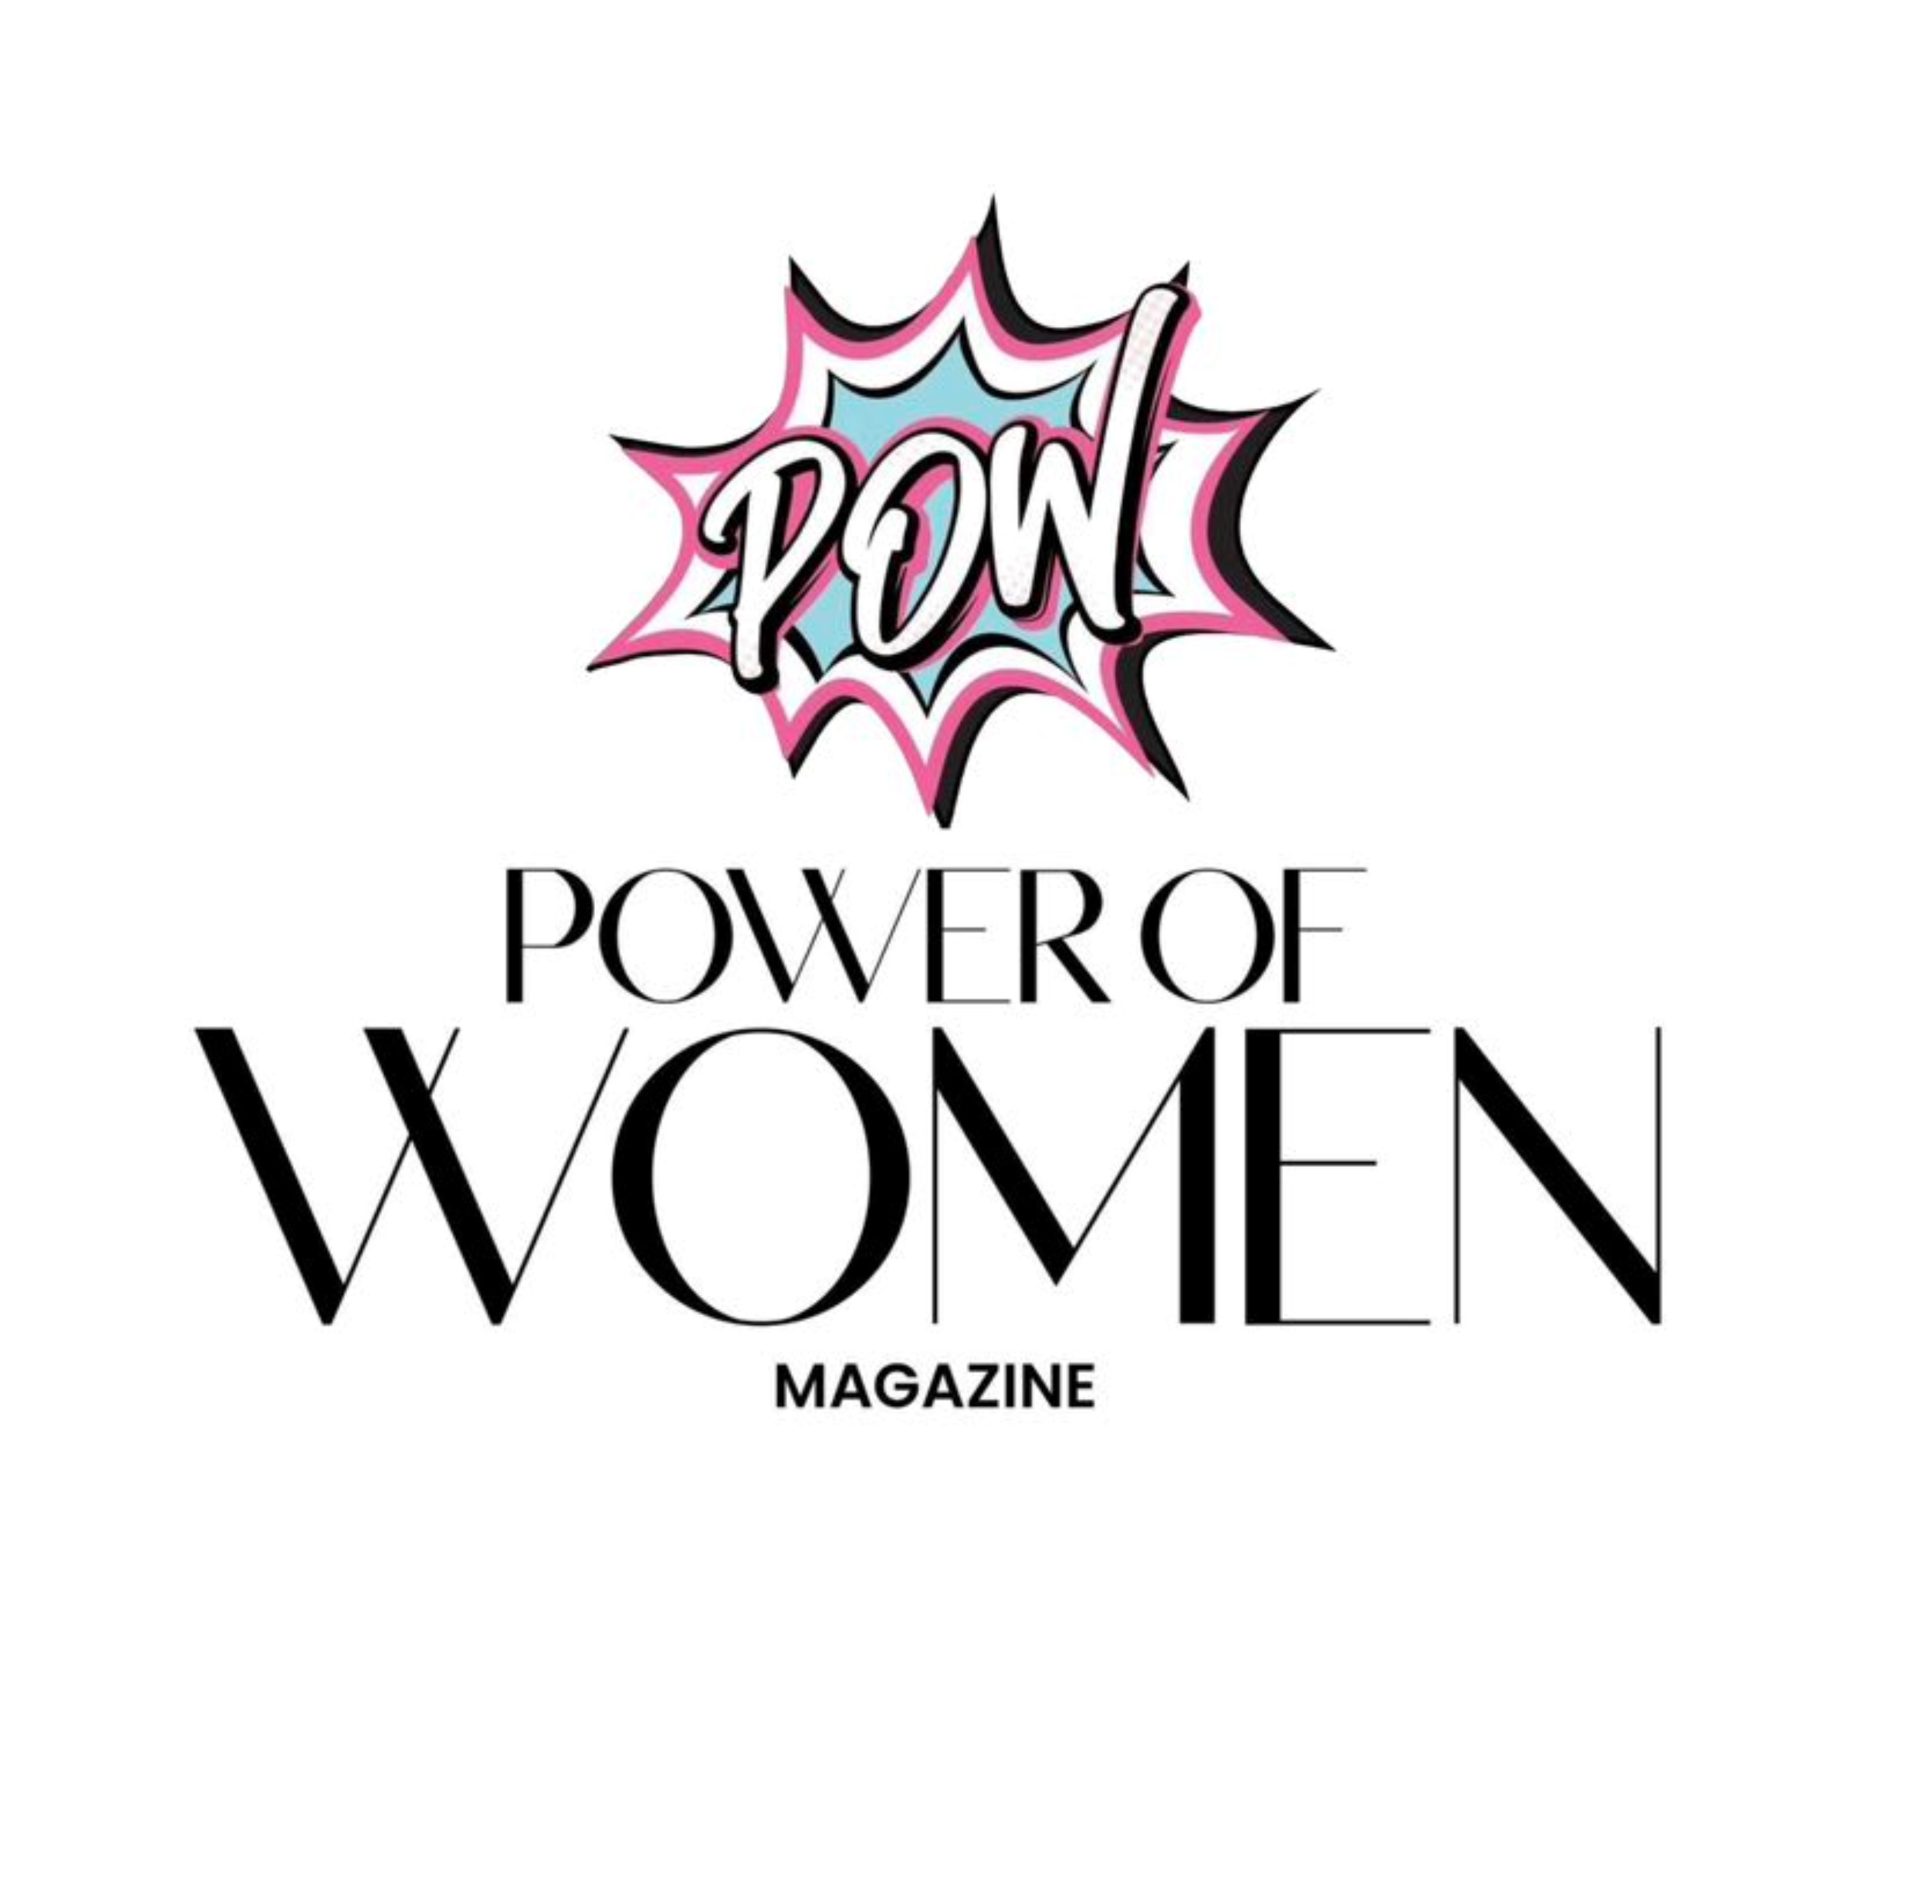 Media Partner for the Miss England Semi final is the Power of Women magazine